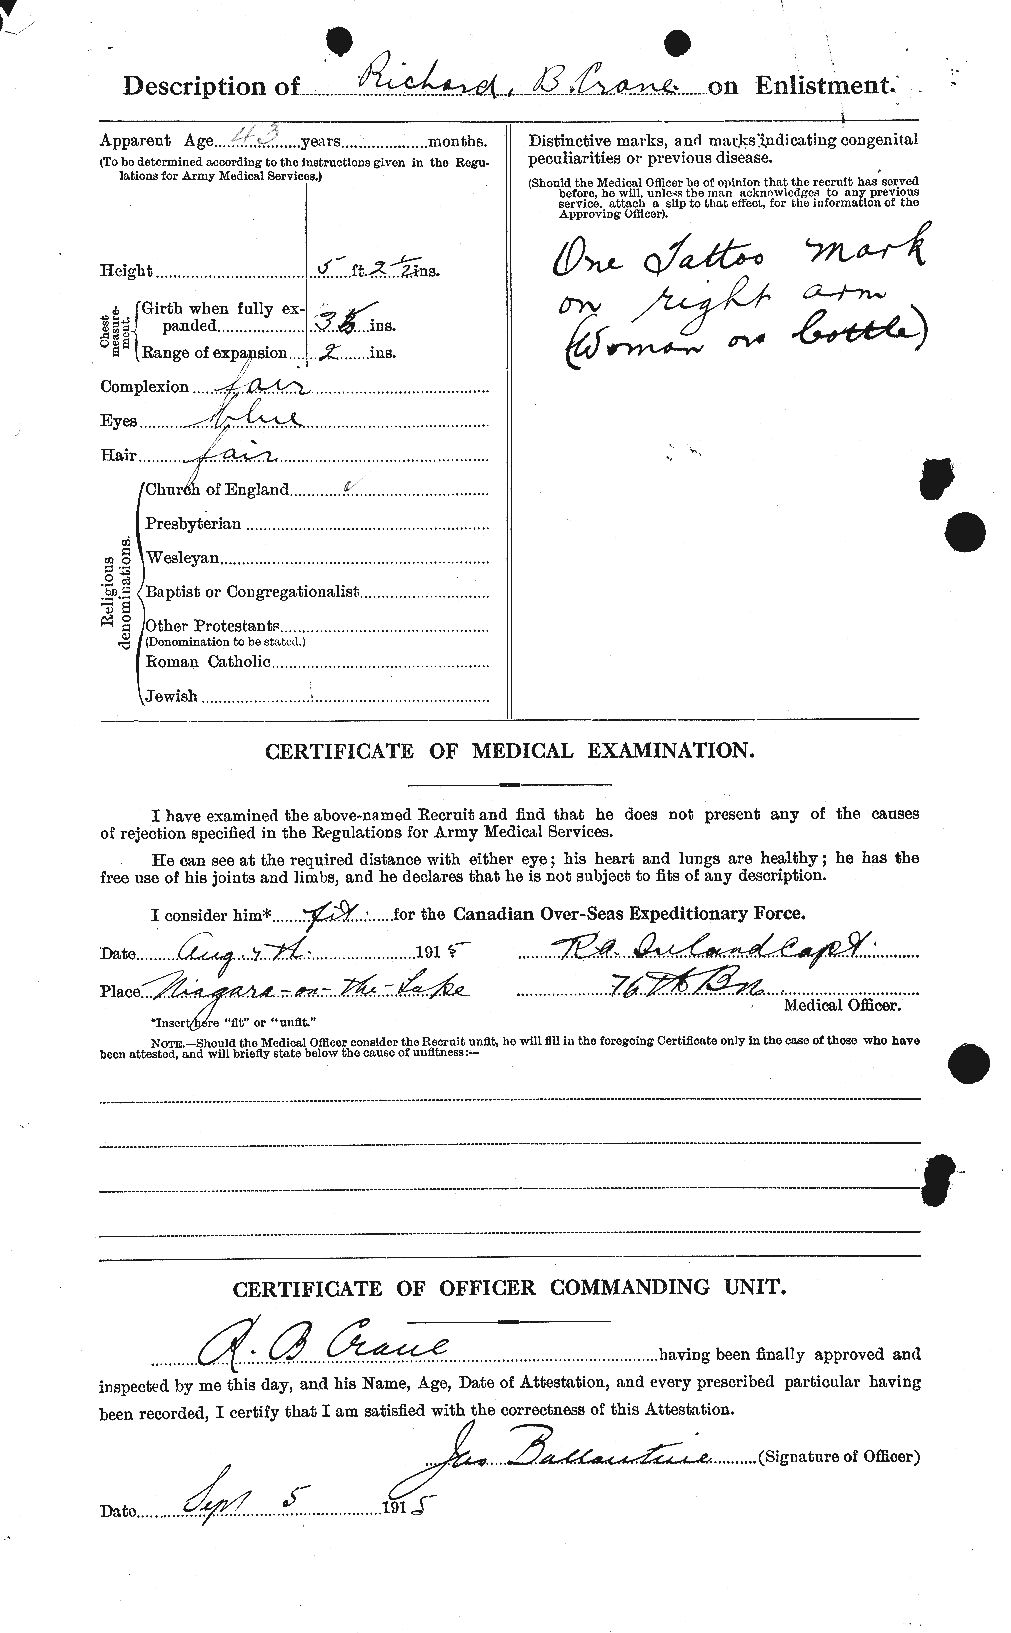 Personnel Records of the First World War - CEF 061756b